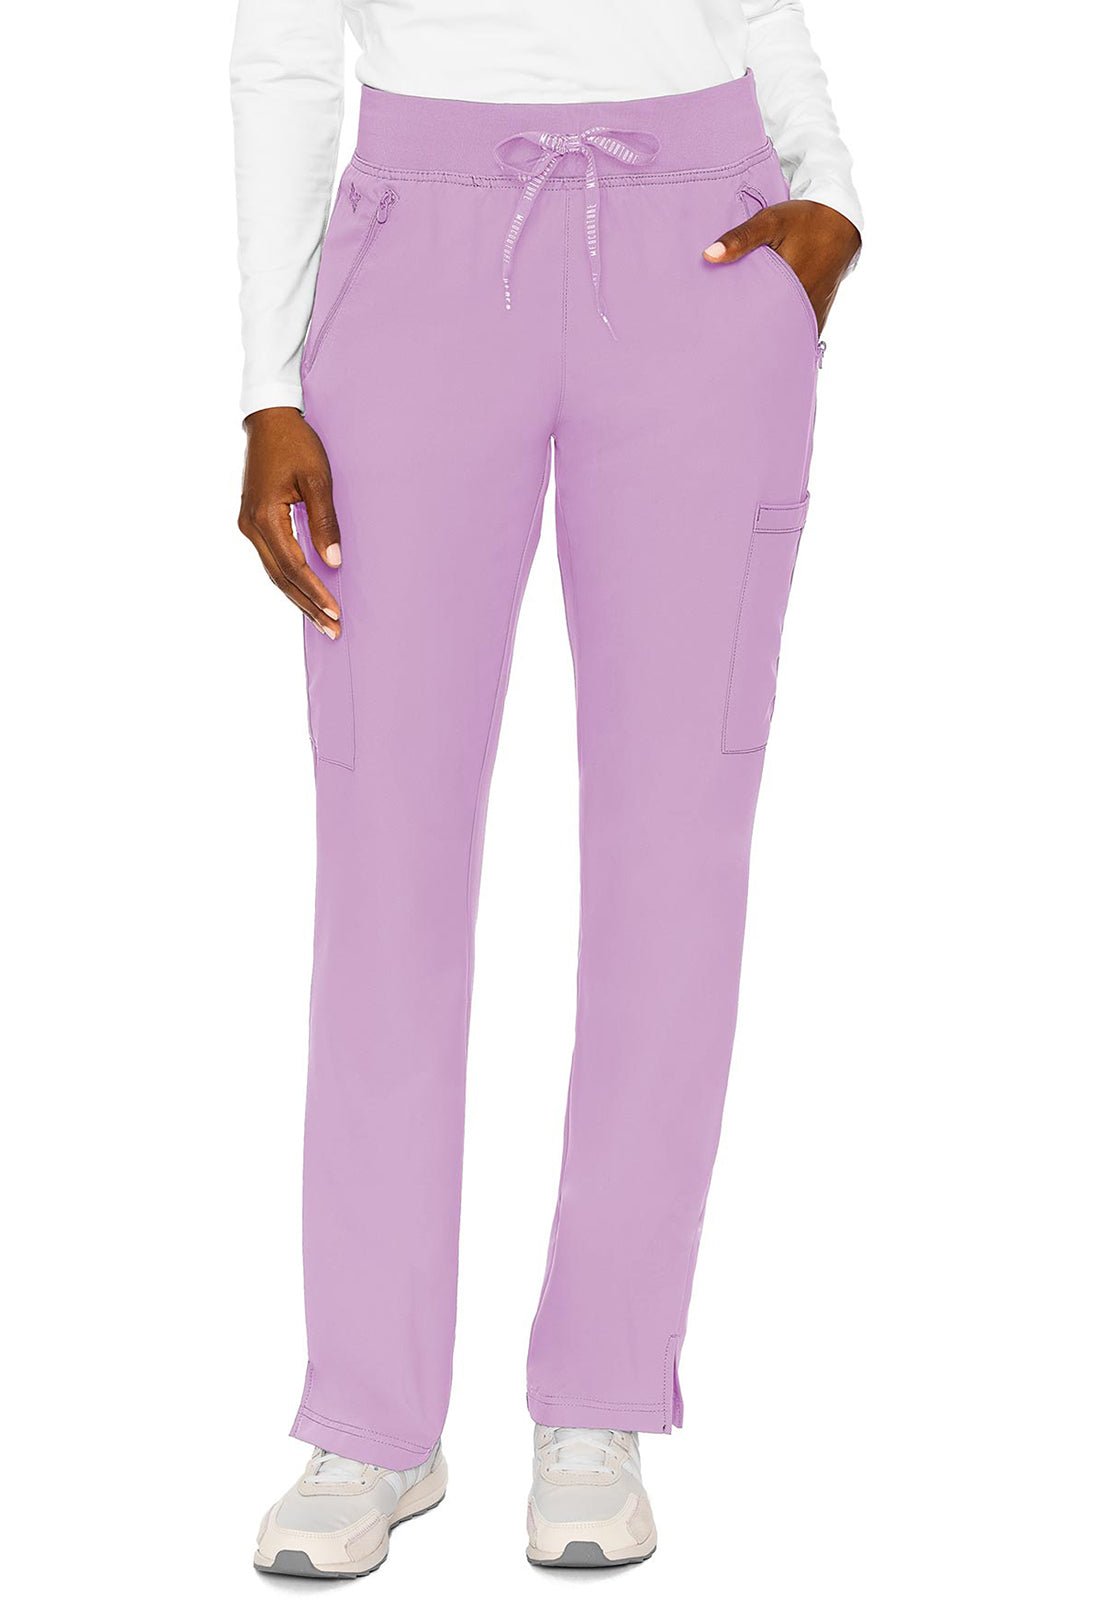 Med Couture Insight Drawstring Scrub Pant MC2702 in Coral, Grape, Lilac, Pink - Scrubs Select